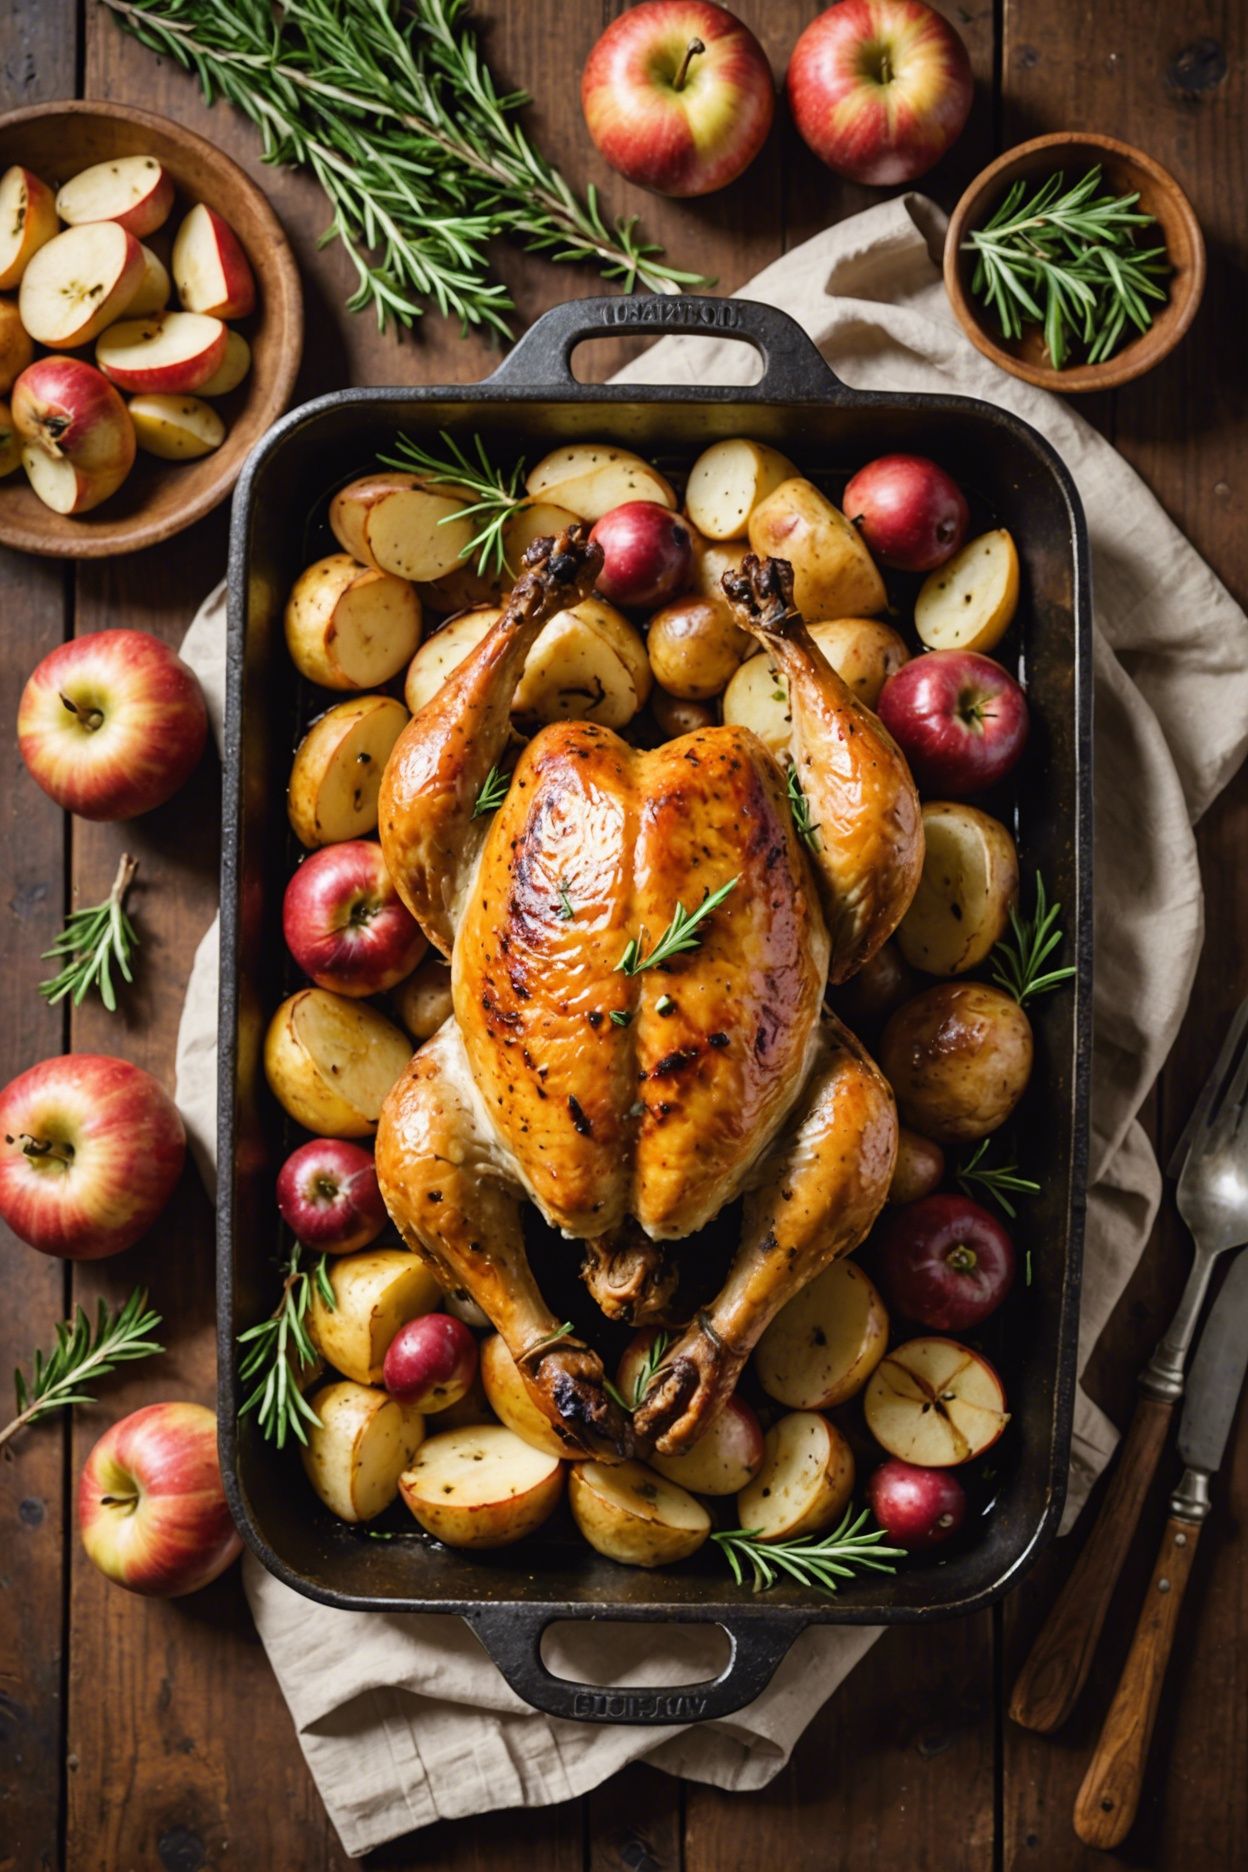 Rosemary Roasted Chicken With Apples And Potatoes